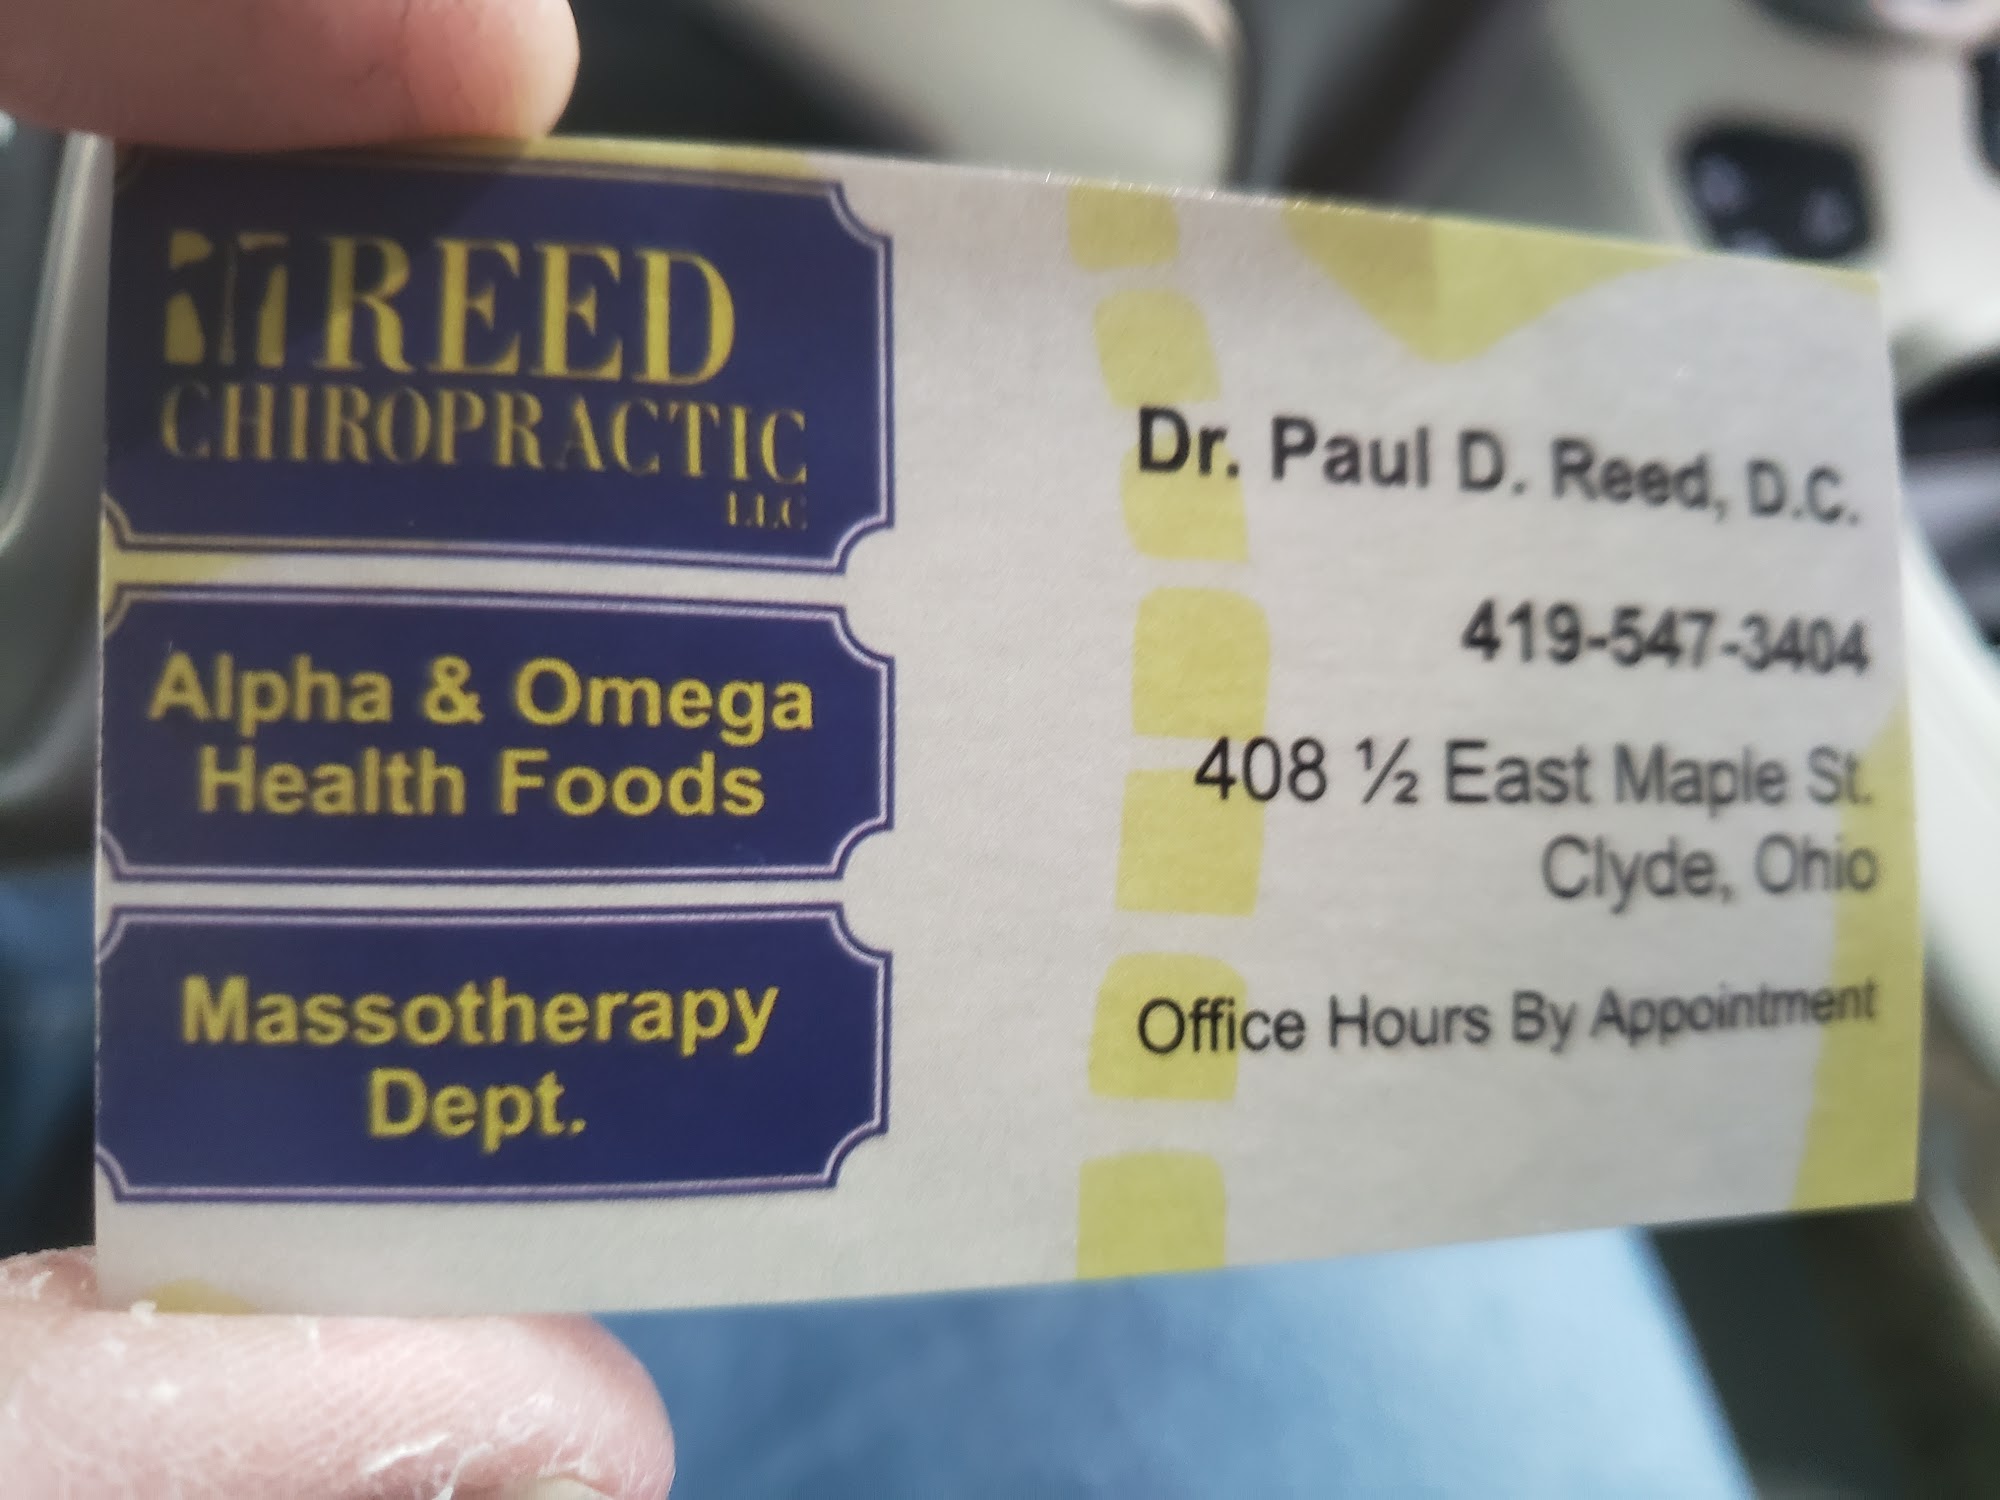 Reed Chiropractic 408 E Maple St, Clyde Ohio 43410